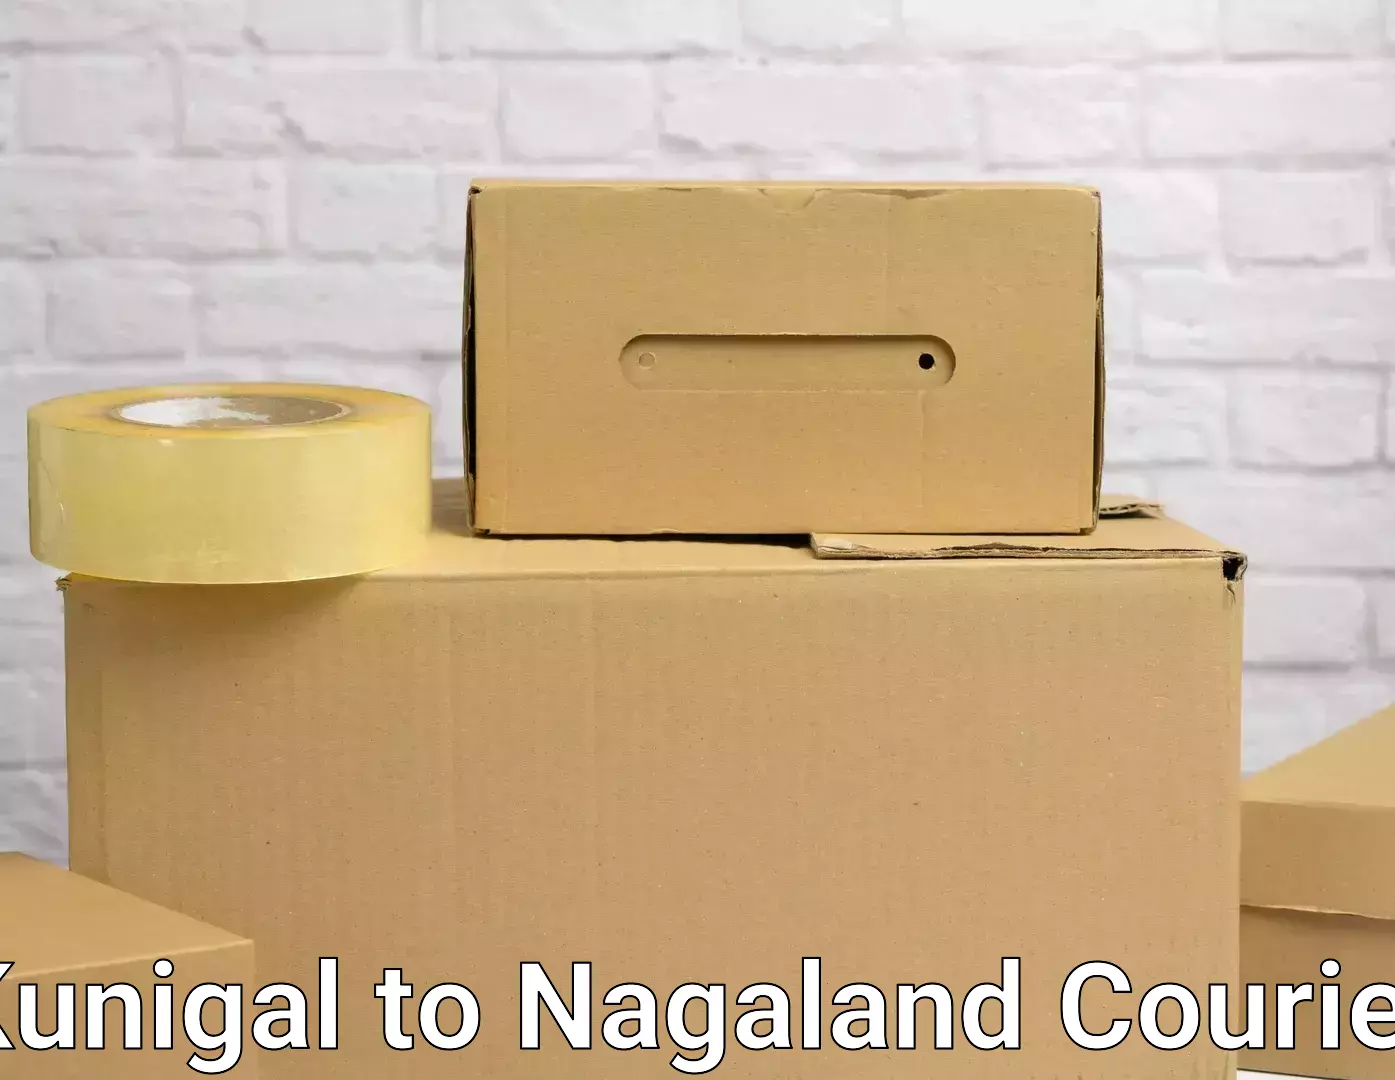 Trusted relocation experts Kunigal to Nagaland